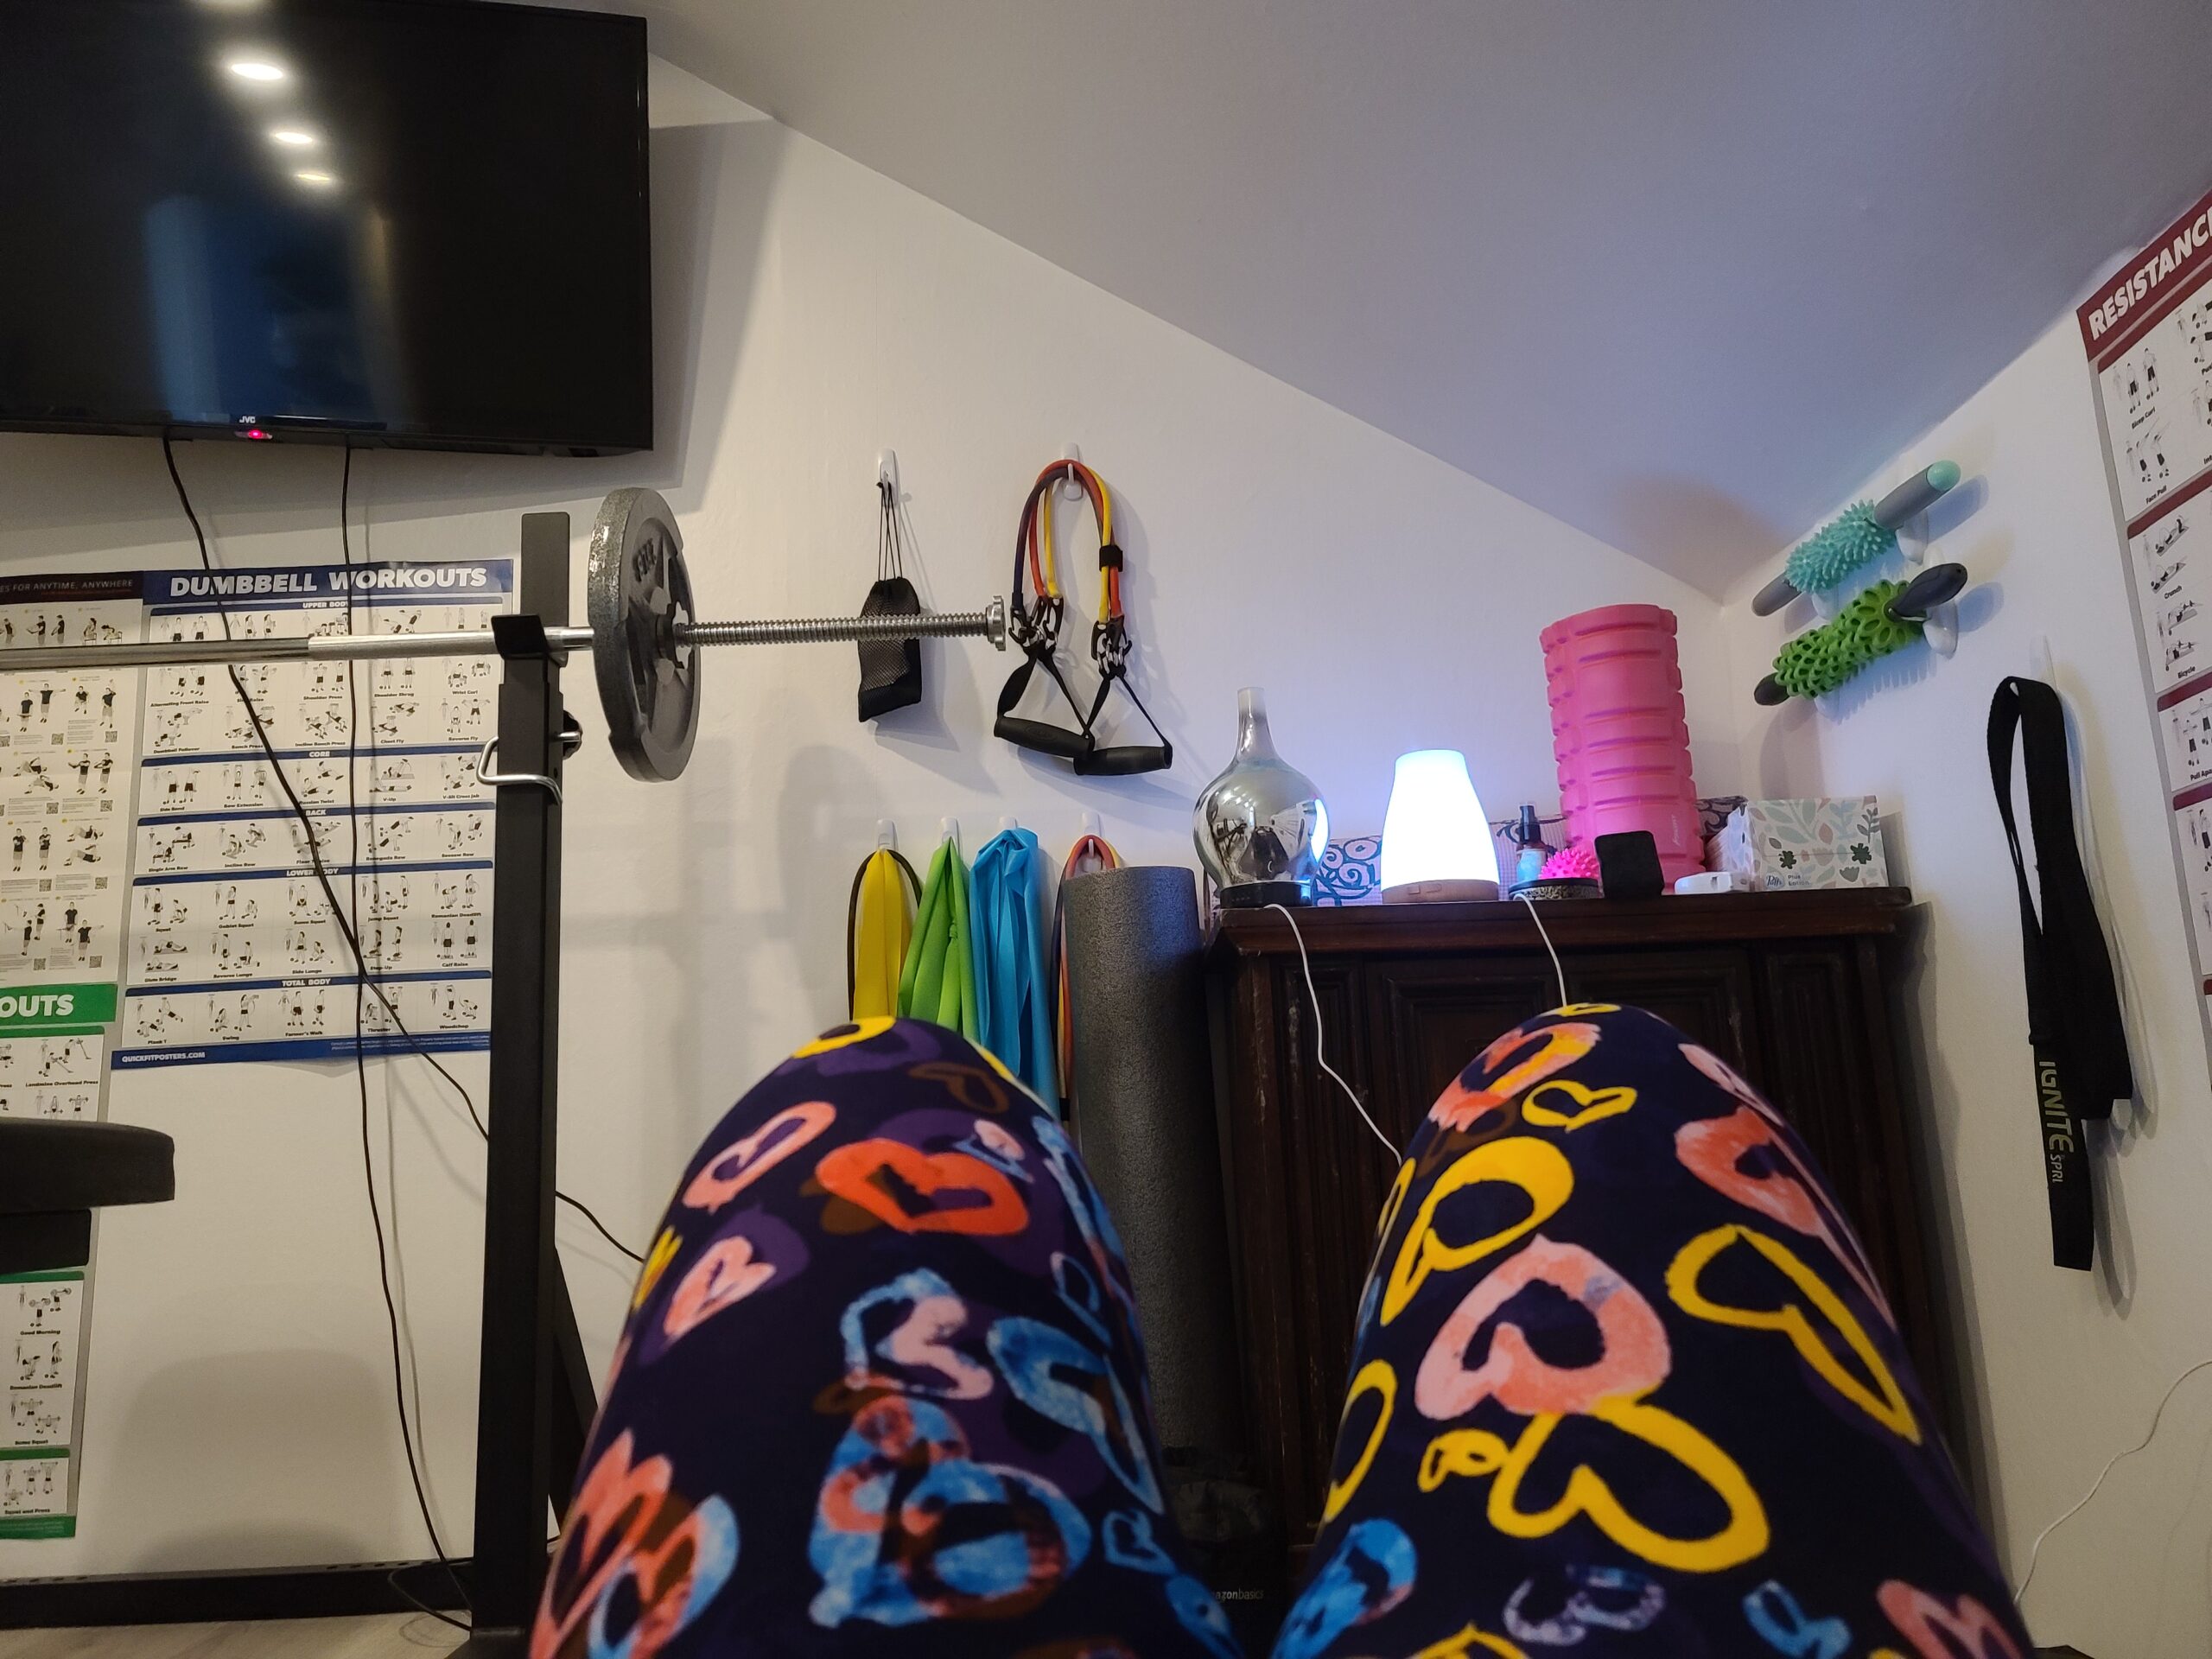 A view of a home gym, over knees clad in colourful tights.